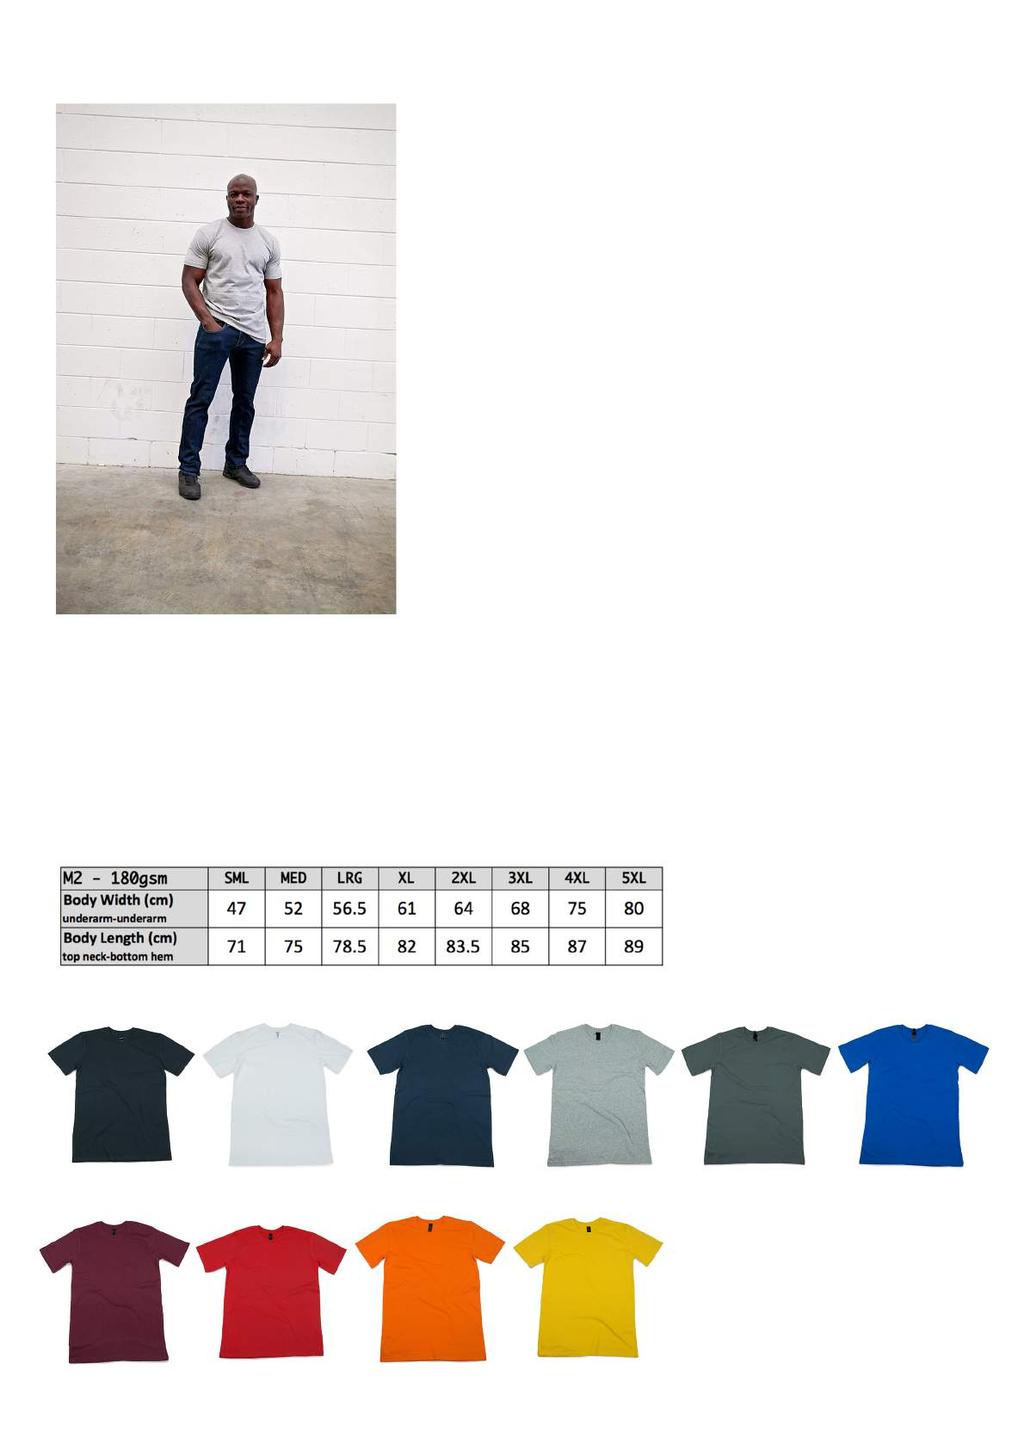 M2- Mens Classic T-Shirt - 180gsm Our Mens Classic T-shirt is the essential all purpose tee with a wider cut and longer length giving it a more regular